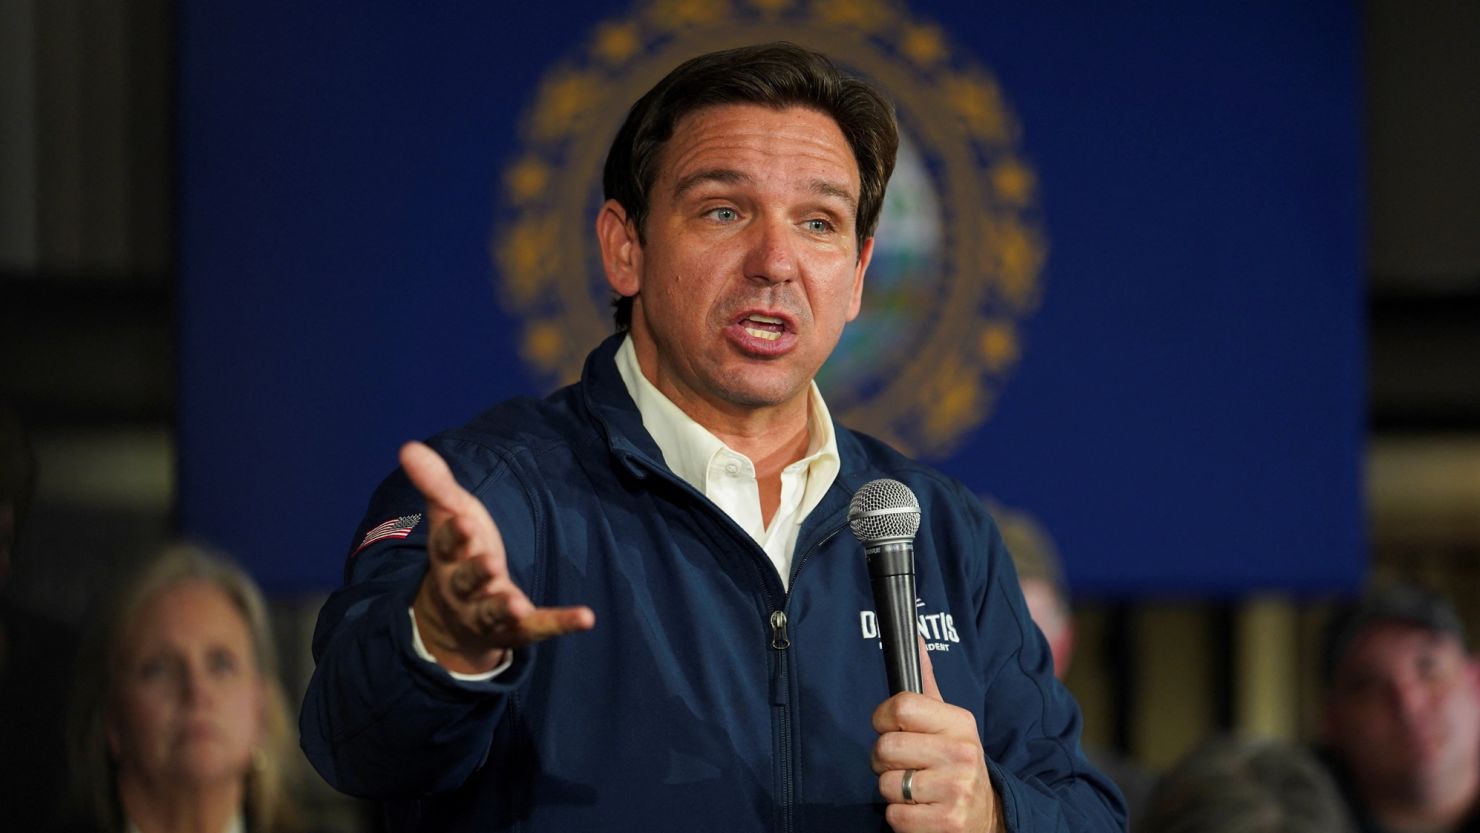 Republican presidential candidate and Florida Governor Ron DeSantis speaks at a Never Back Down campaign event in Keene, New Hampshire, U.S., on November 21, 2023. REUTERS/Sophie Park